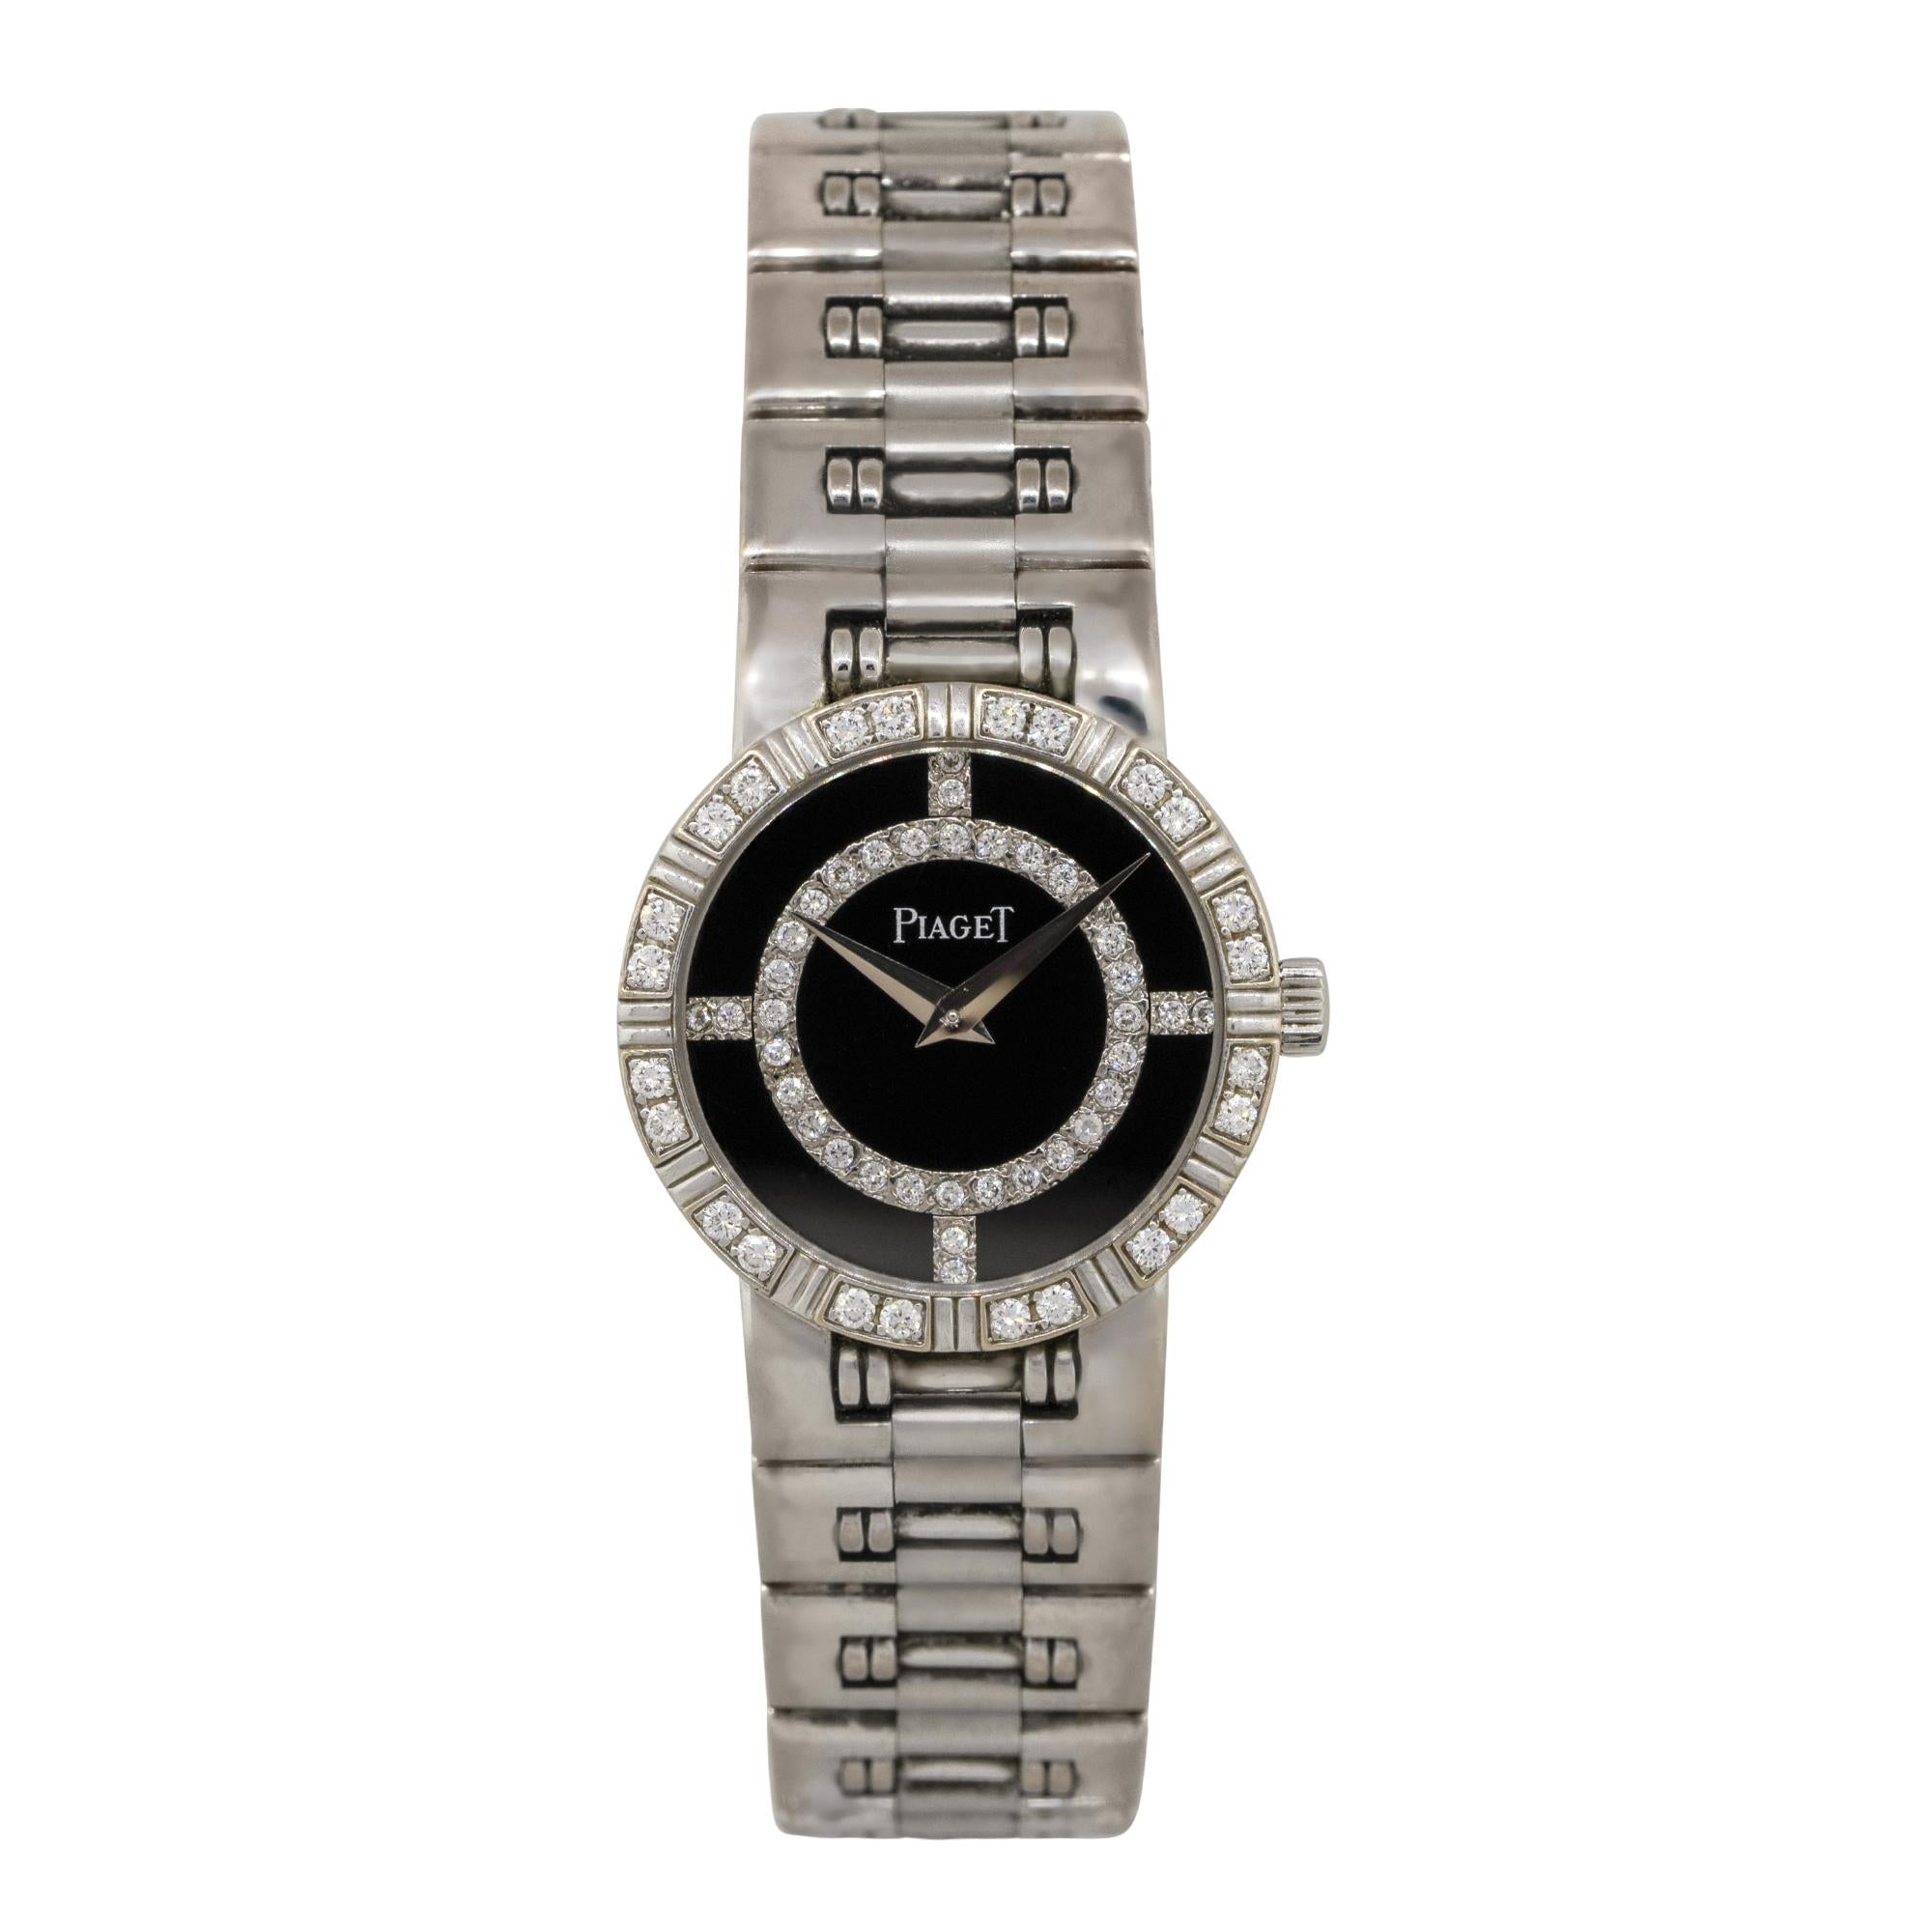 Brand: Piaget
Model: 90564
Case Material: 18k White Gold
Bezel: 18k White Gold bezel with Diamonds
Dial: Black Onyx Diamond dial with silver hands
Bracelet: 18k White gold link bracelet
Crystal: Sapphire Crystal
Size: Will fit up to a 6